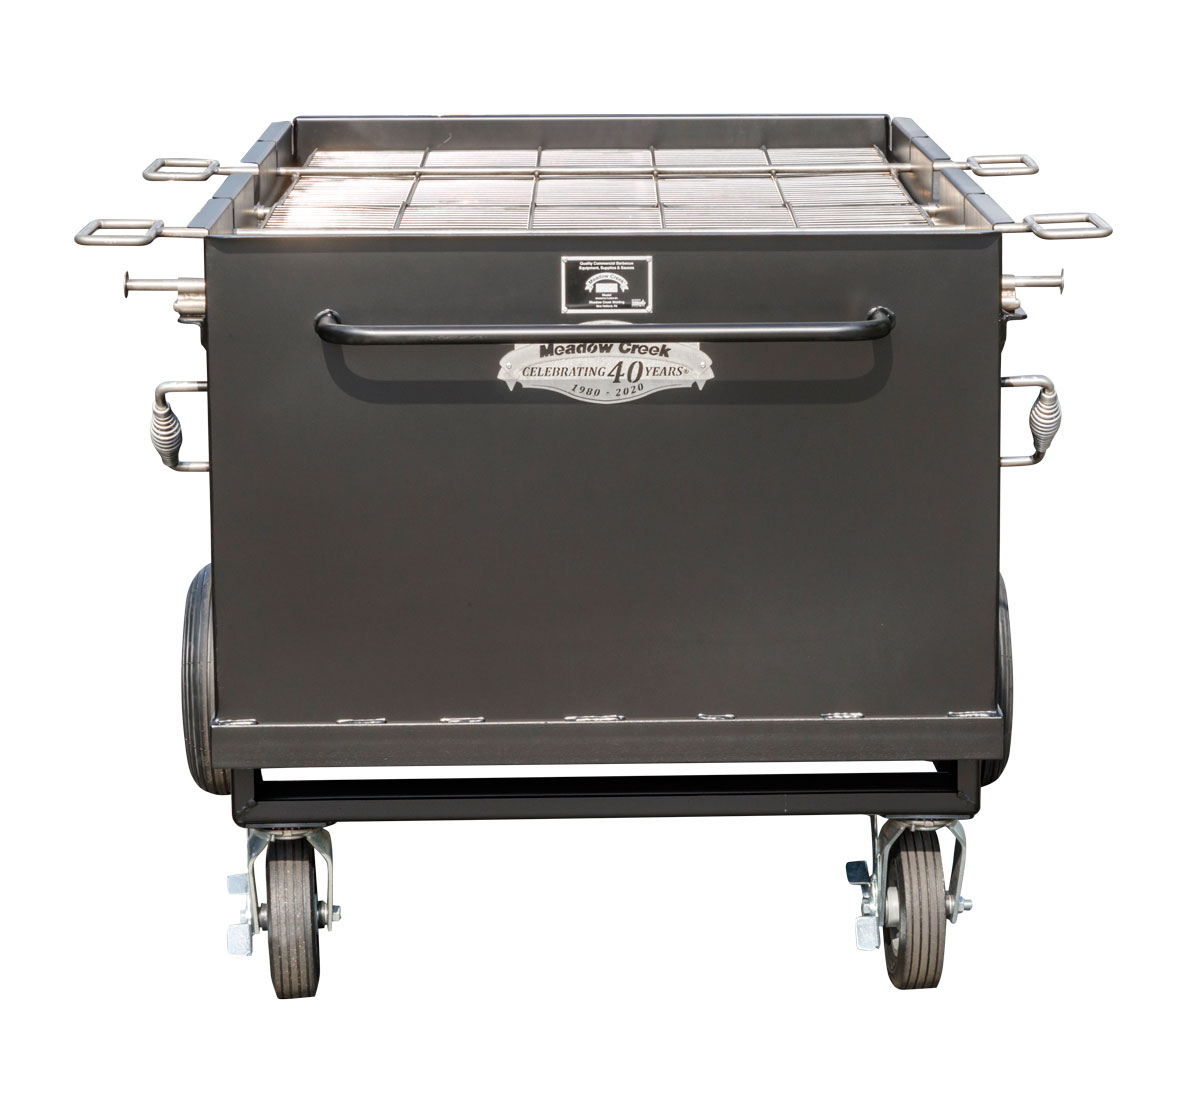 Meadow Creek BBQ42 BBQ Pit - Meadow Creek Barbecue Supply